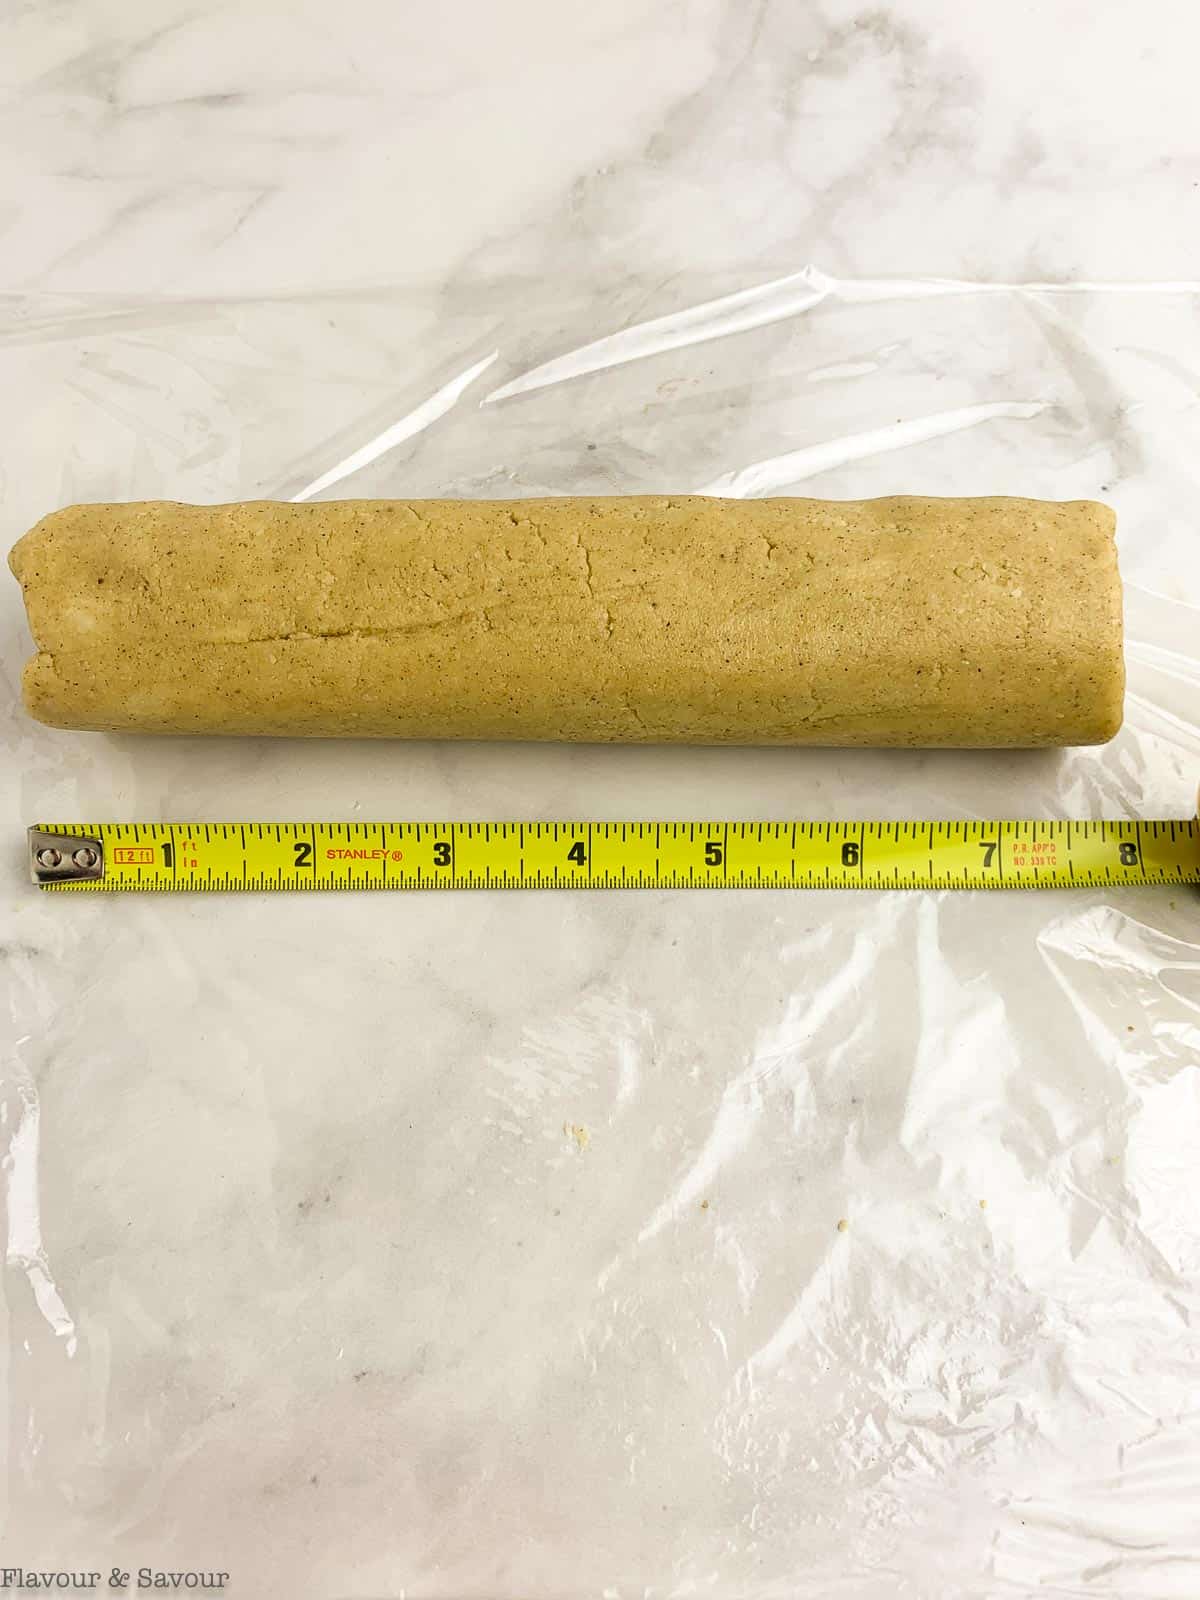 Cookie dough rolled into a log 8 inches long shown with measuring tape.